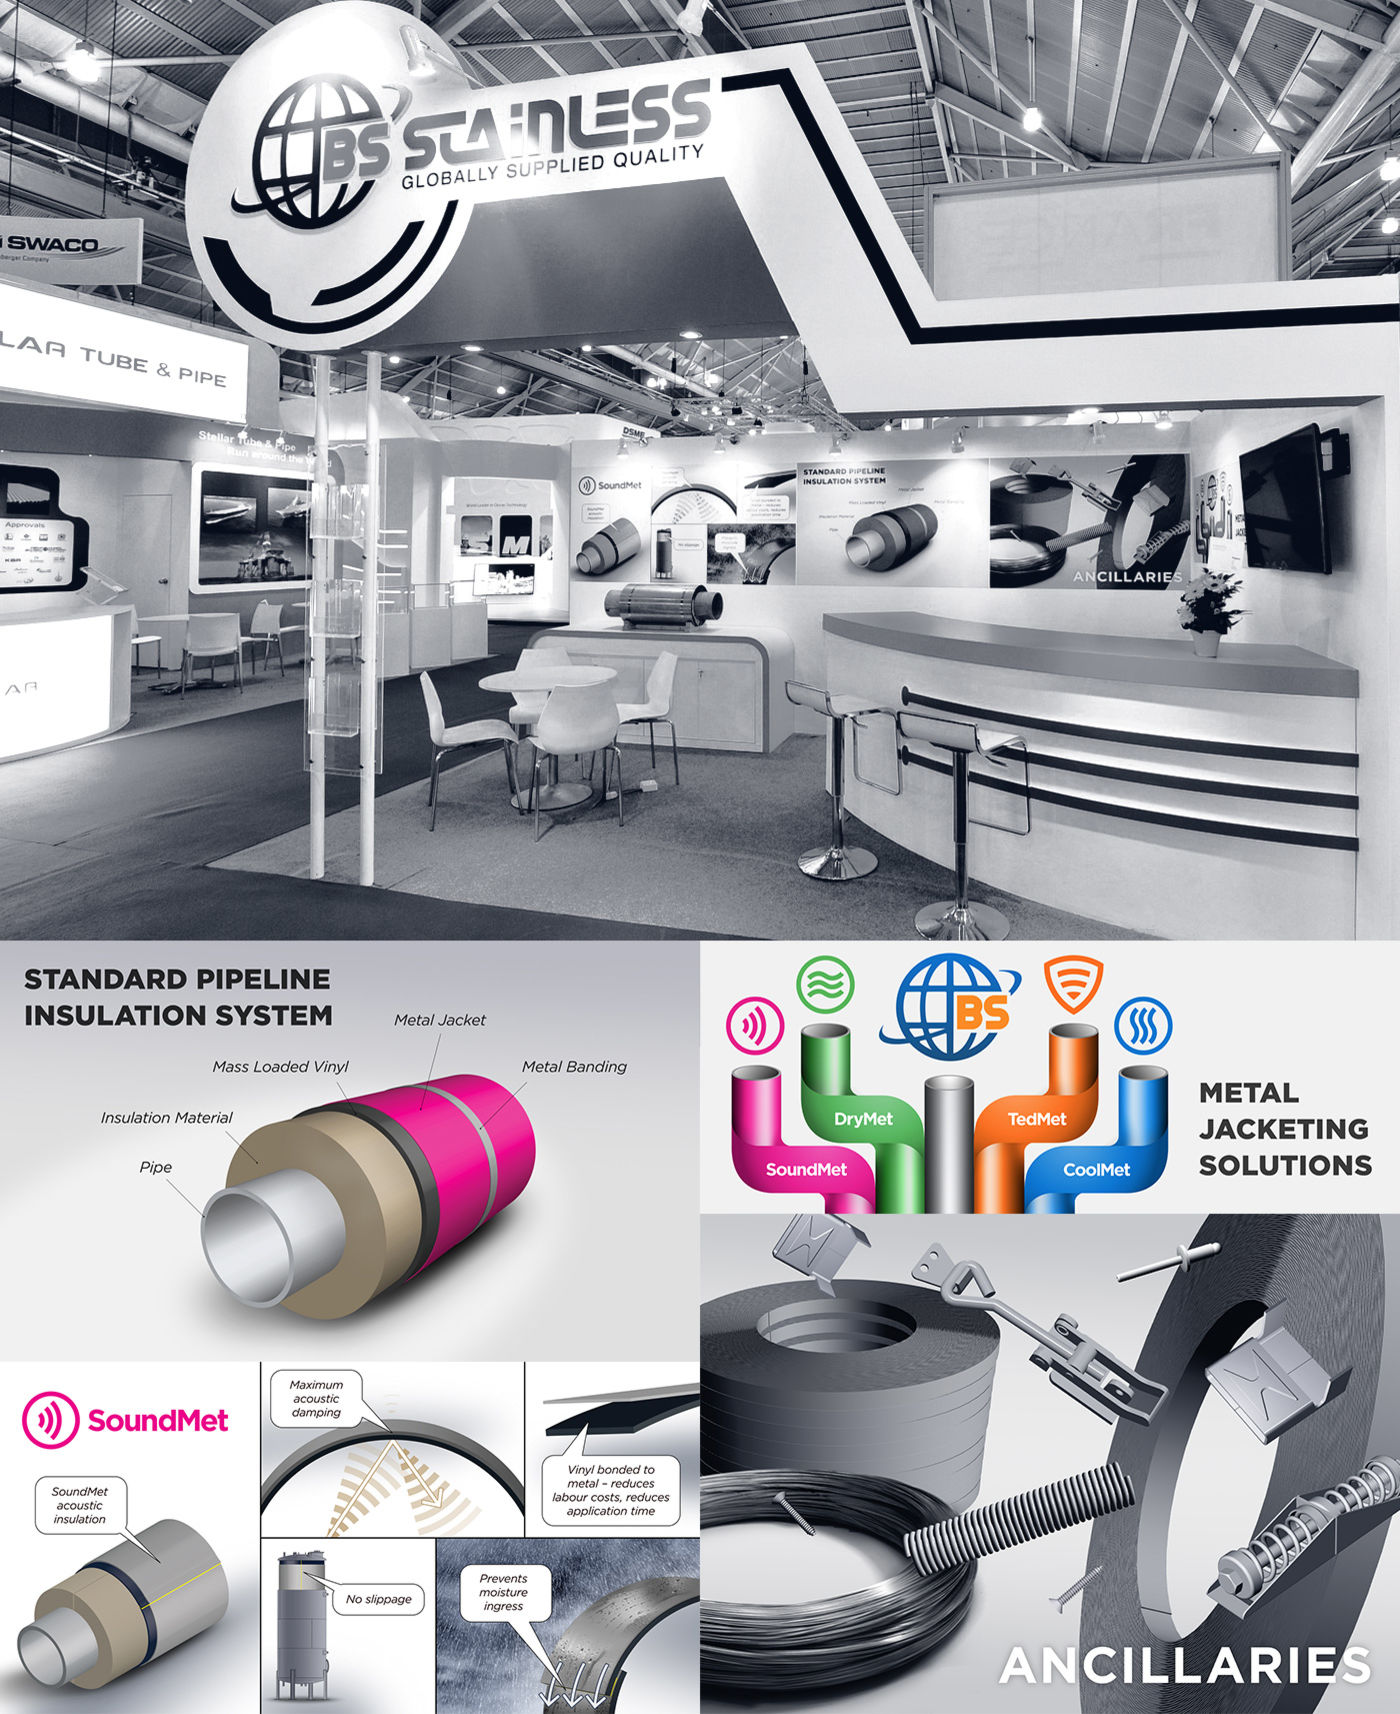 BS Stainless (2012) Gastech 2015 posters